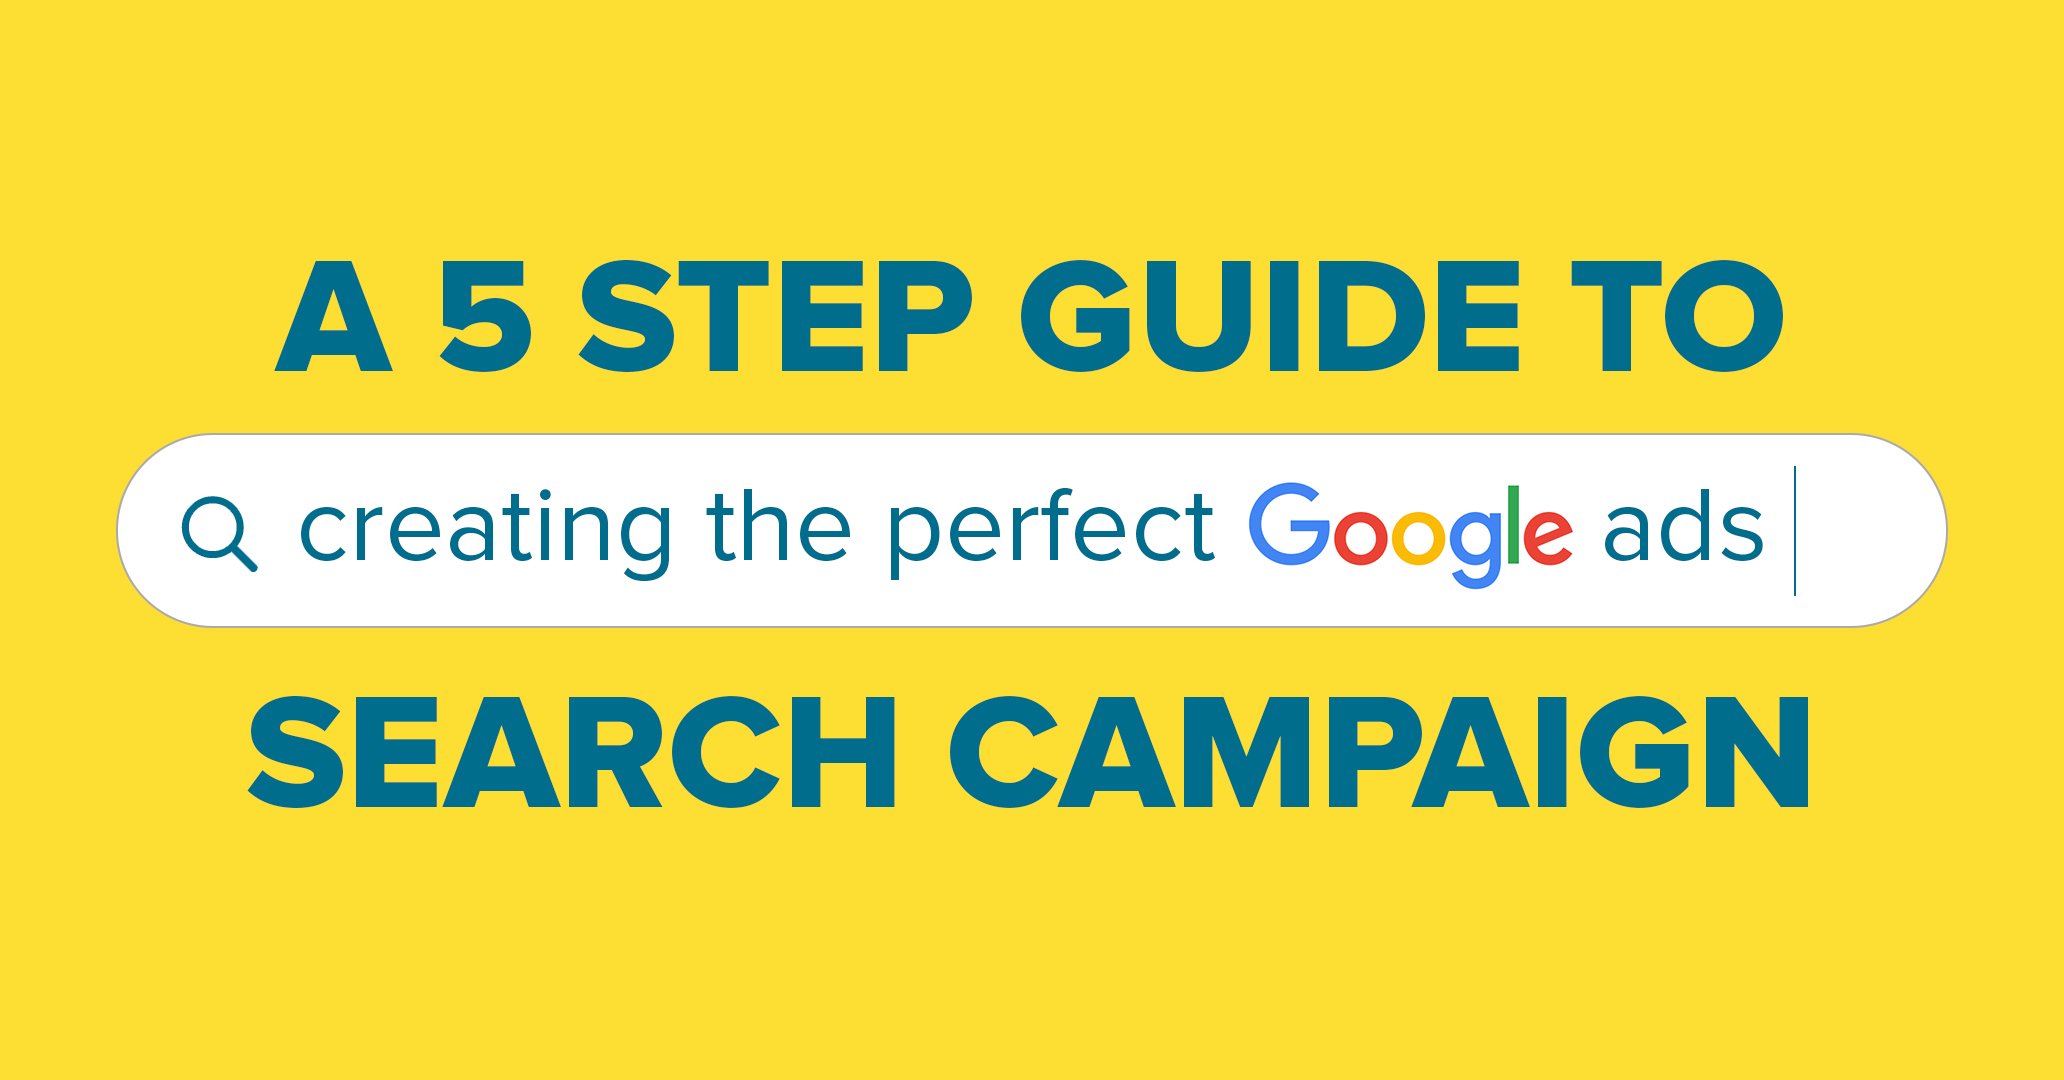 A 5 step guide to creating the perfect Google Ads search campaign